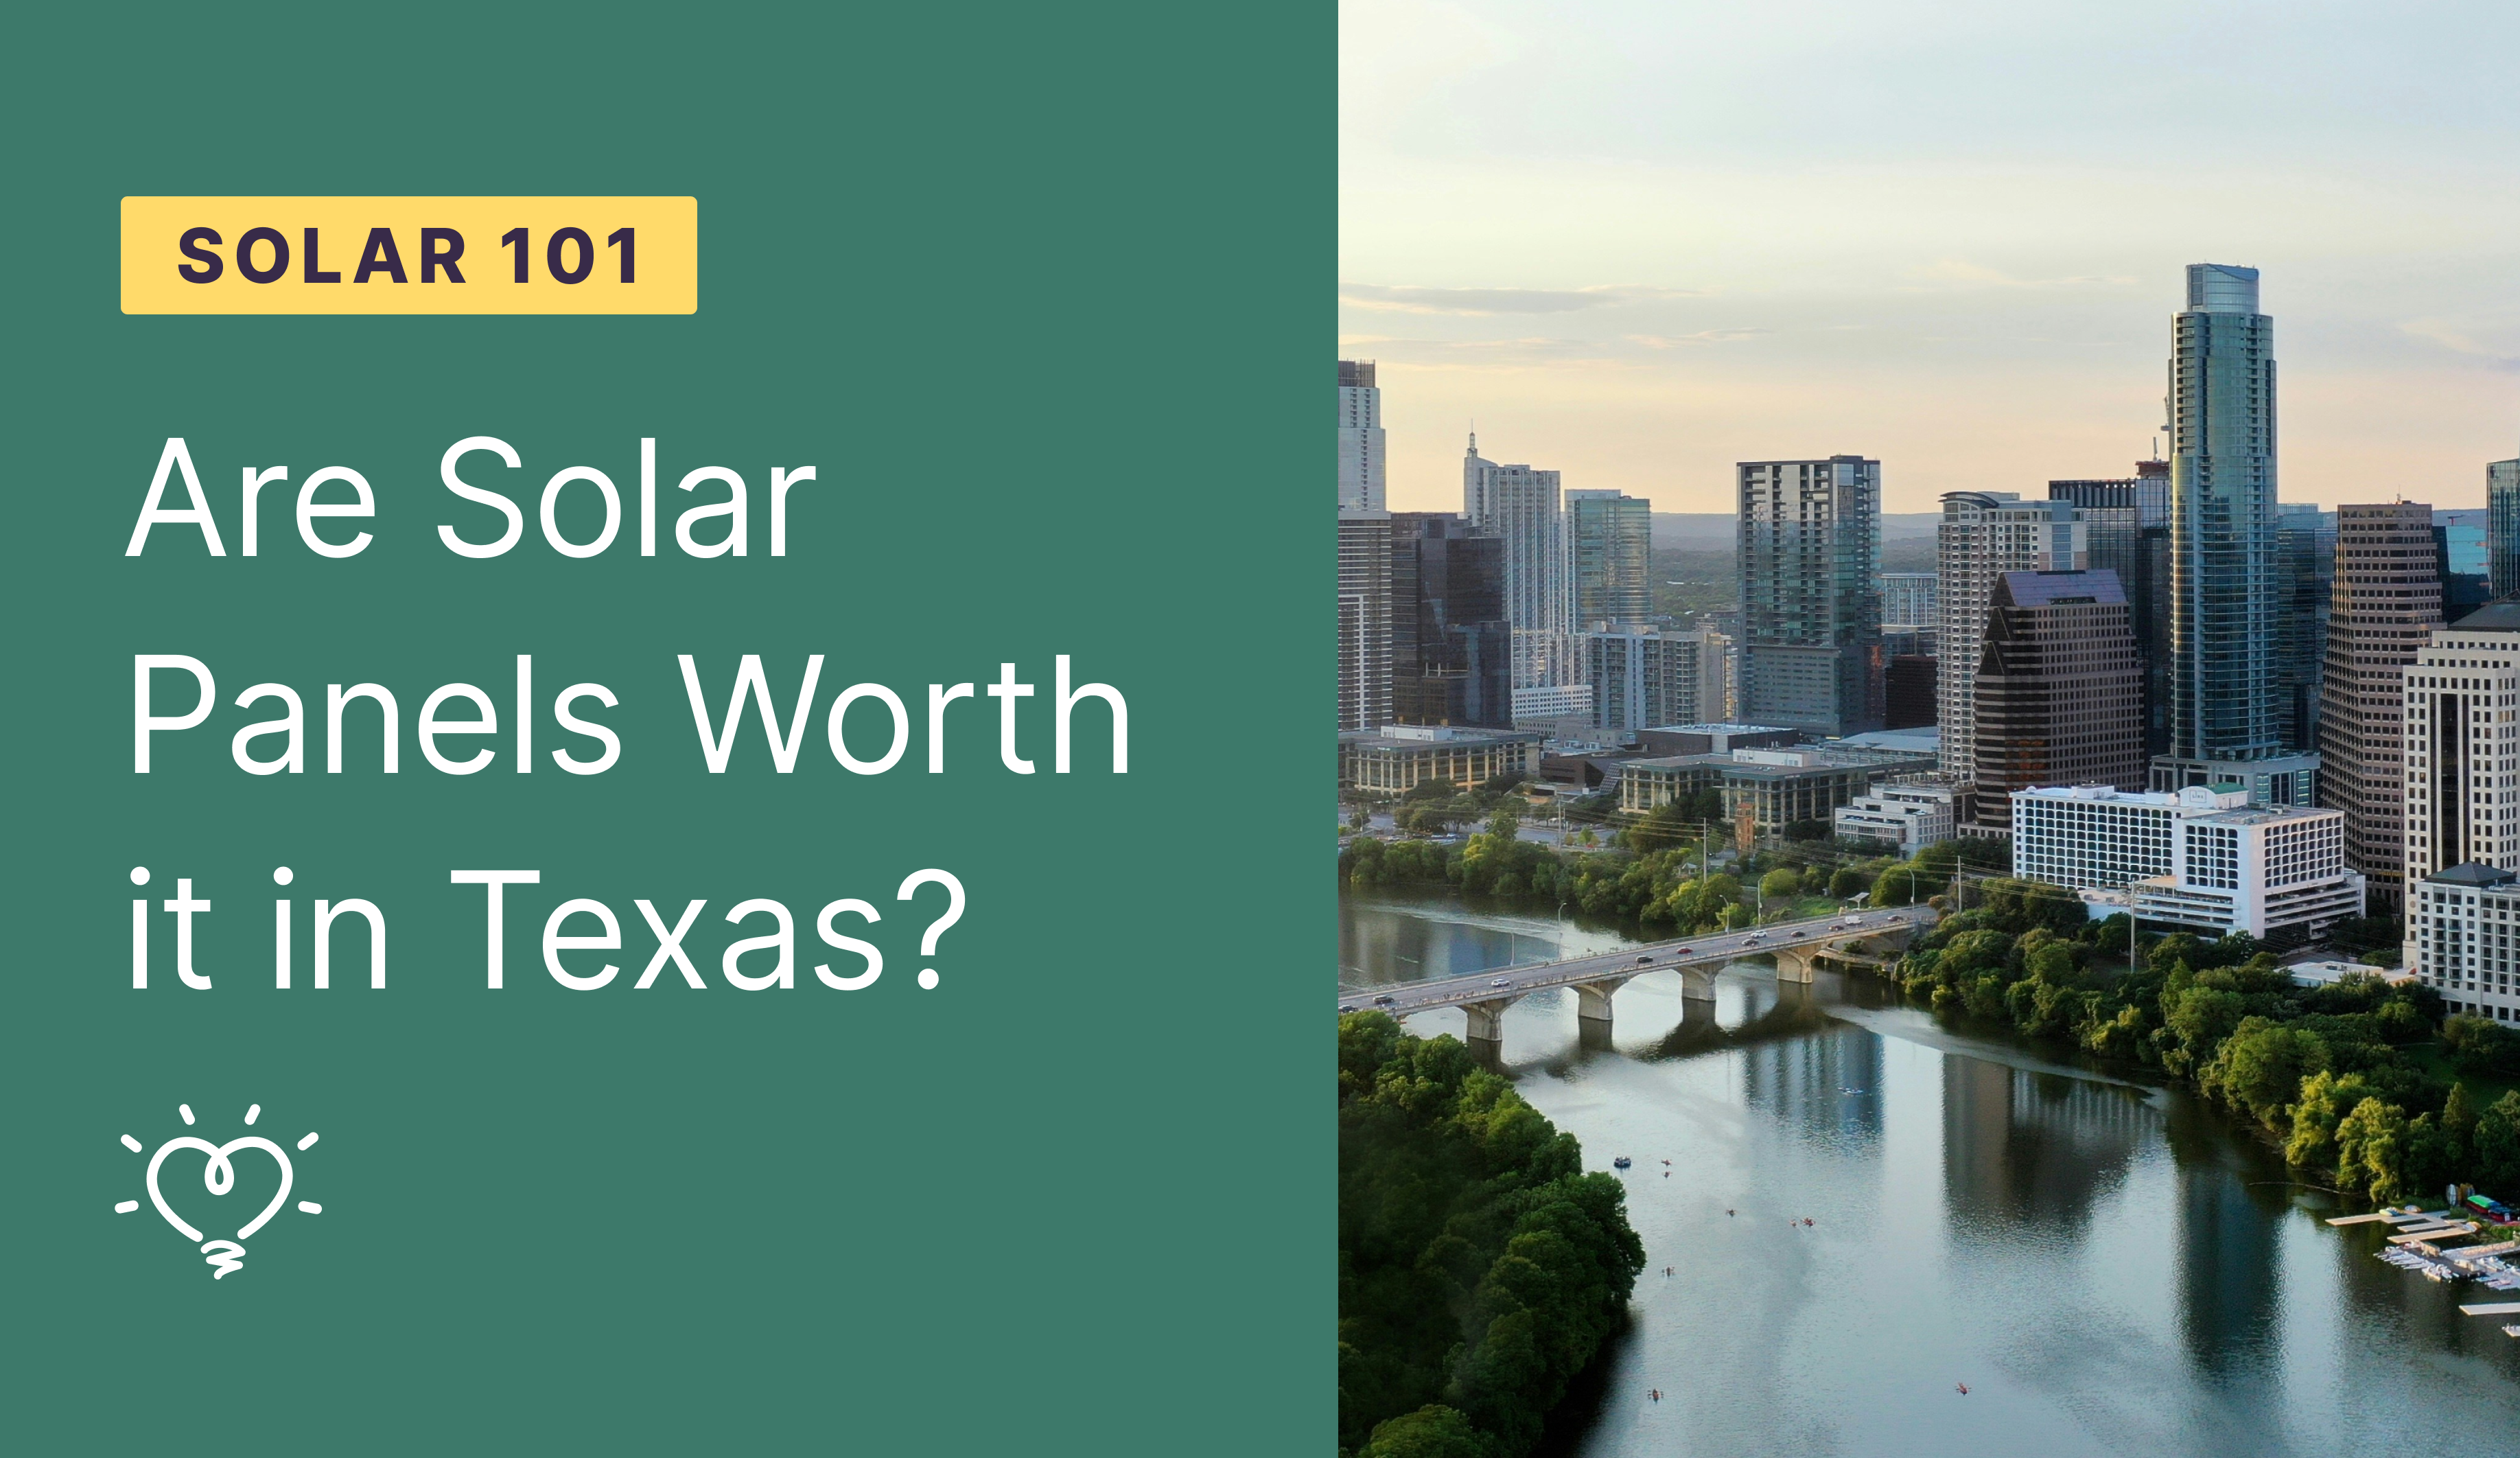 Are Solar Panels Worth it in Texas?